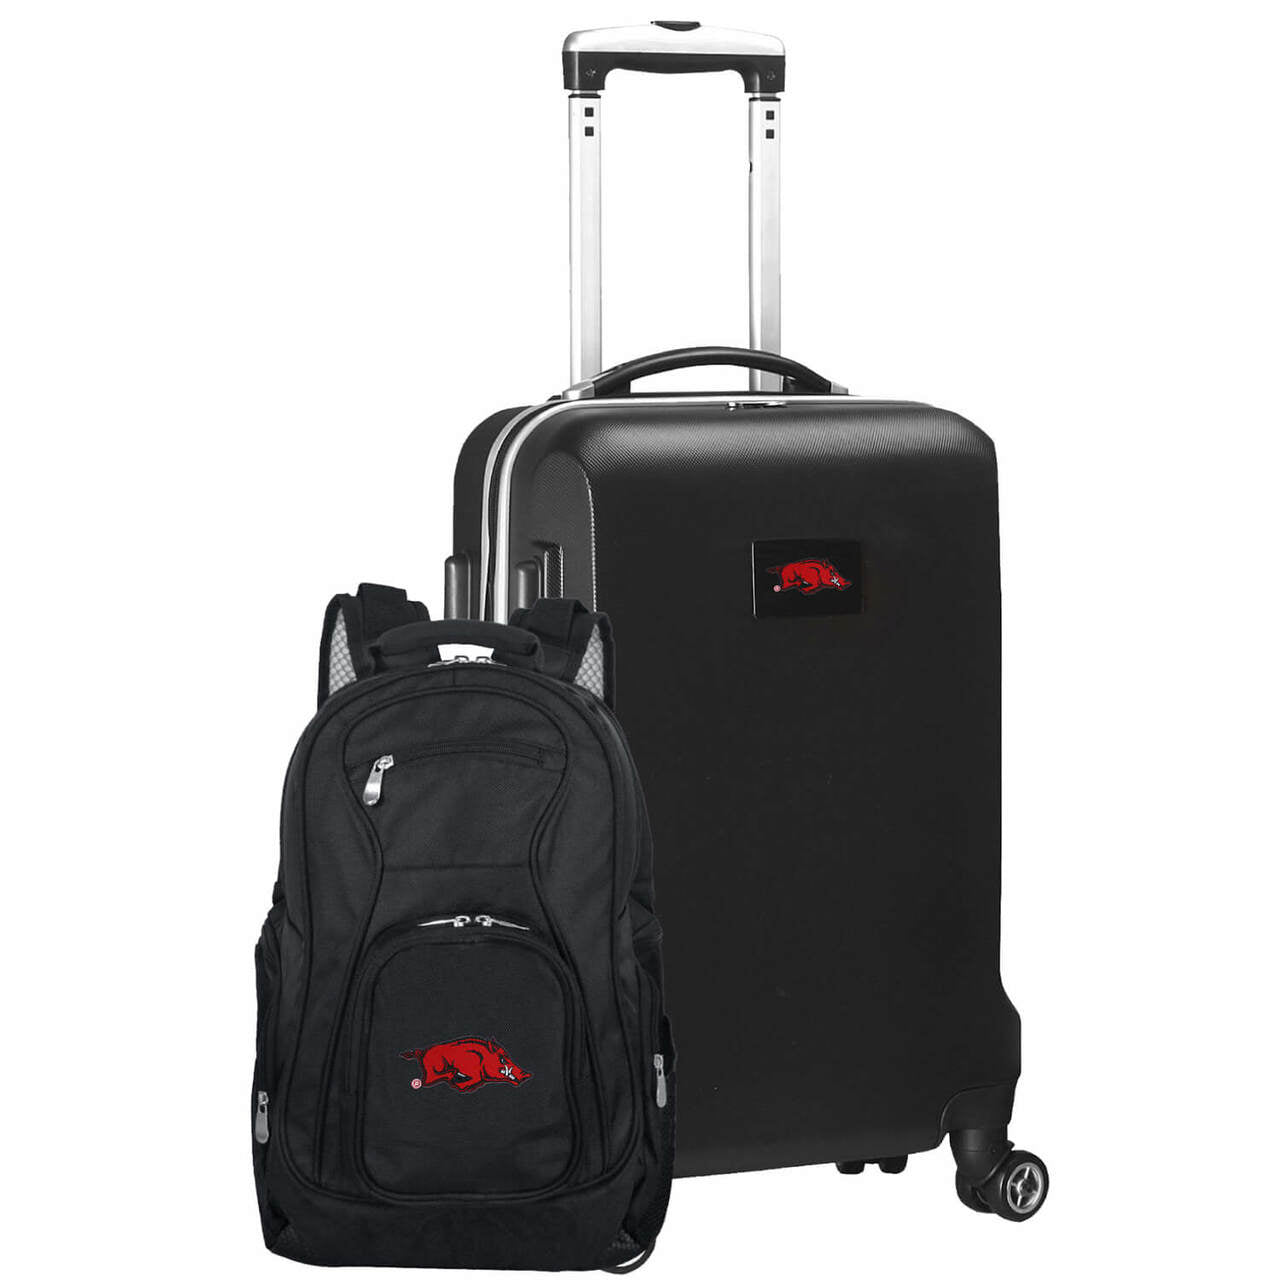 Arkansas Razorbacks Deluxe 2-Piece Backpack and Carry on Set in Black